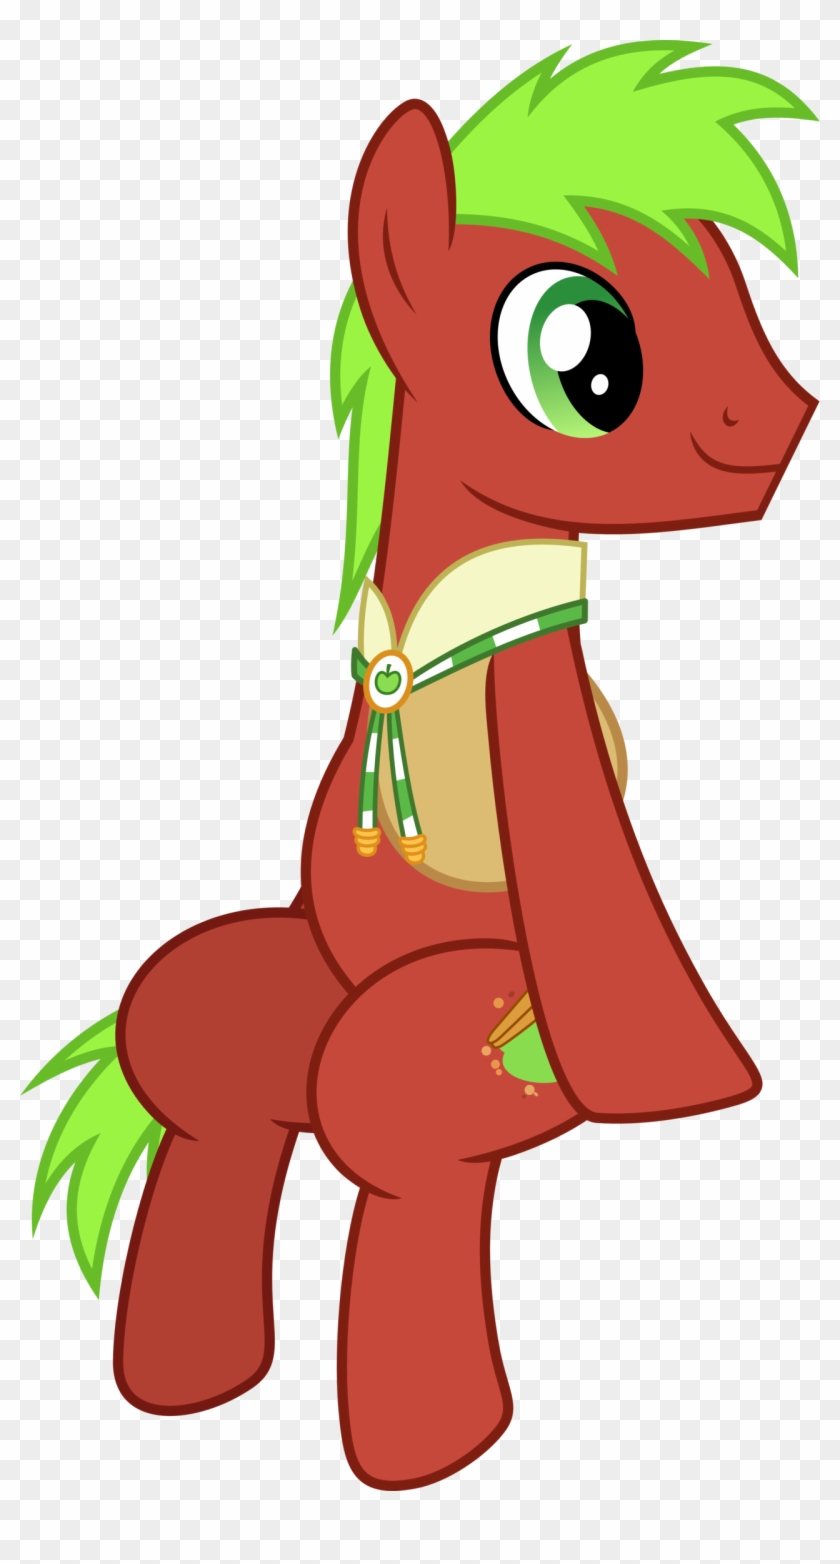 Image Apple Cinnamon Vector Png The My Little Pony - Mlp Apple Cinnamon Vector #435867